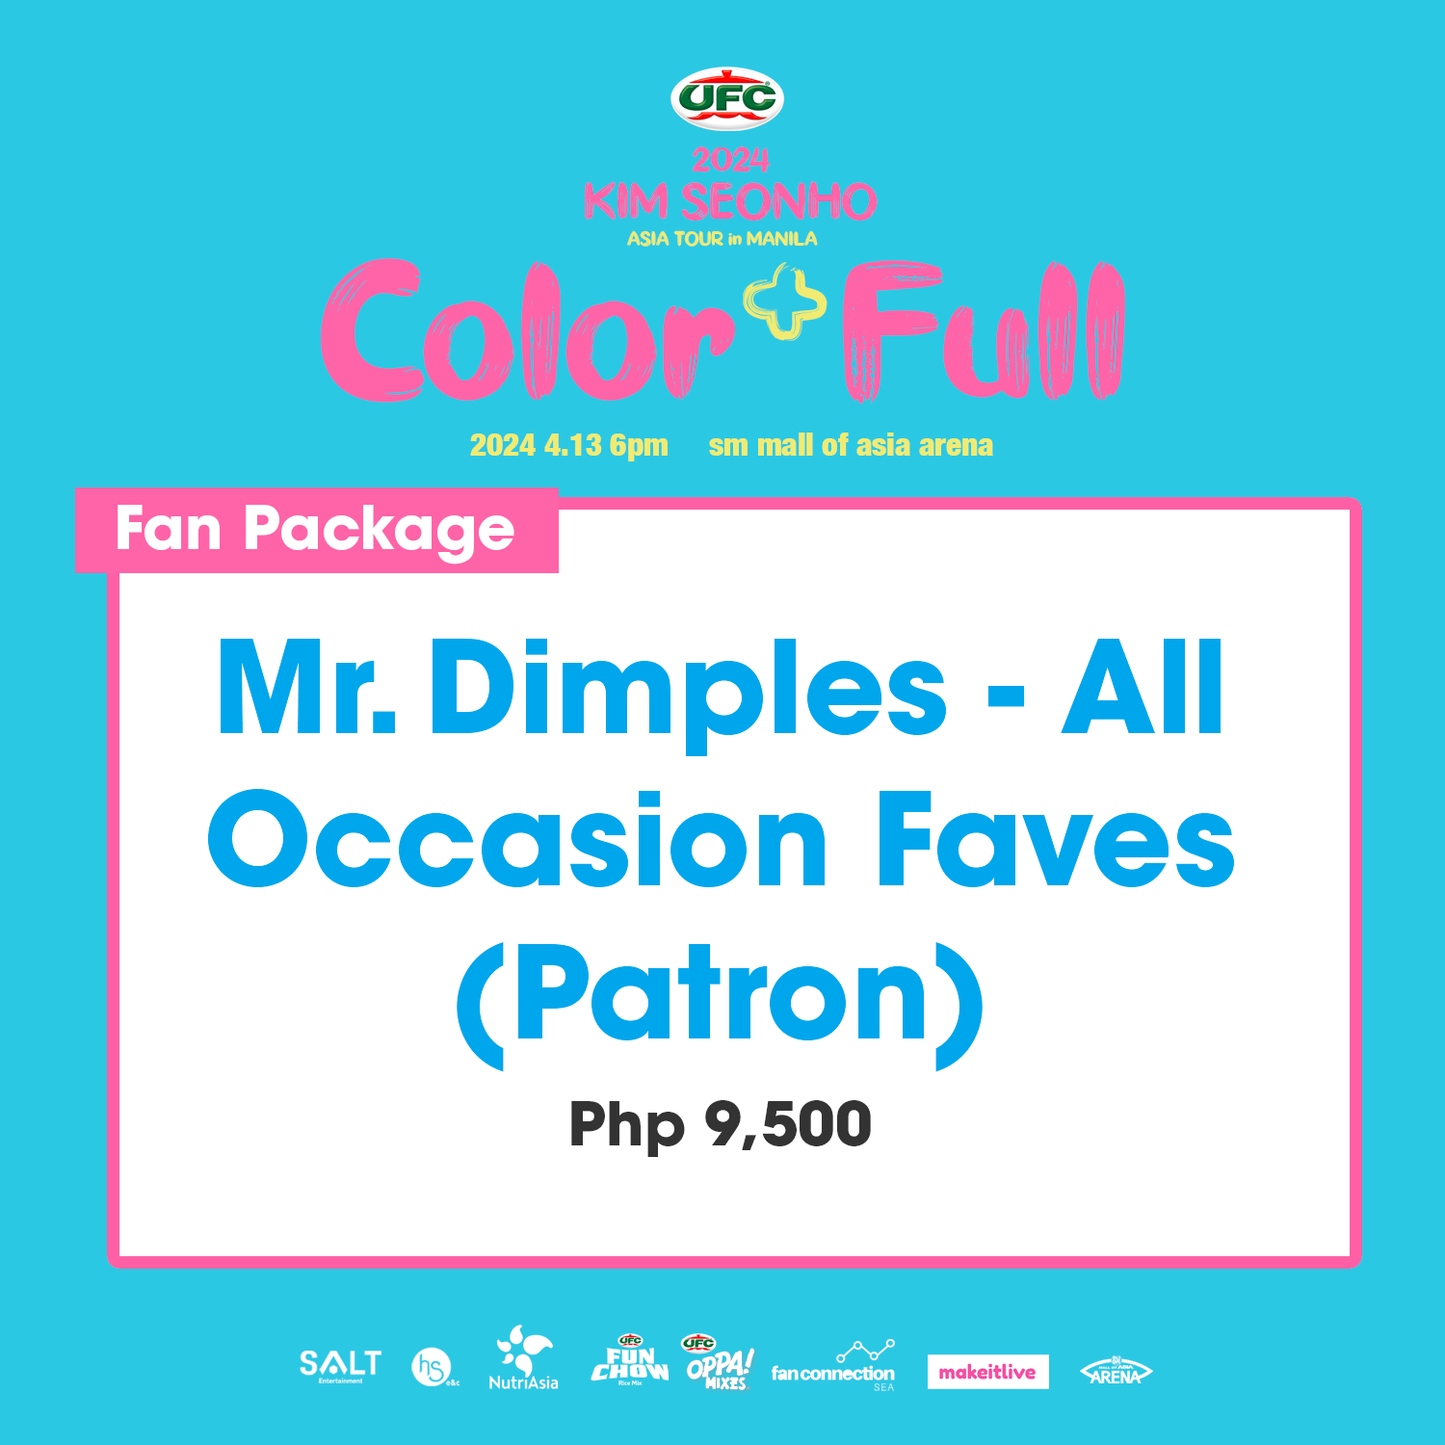 KSH - Mr. Dimples - All Occasion Faves (Patron)